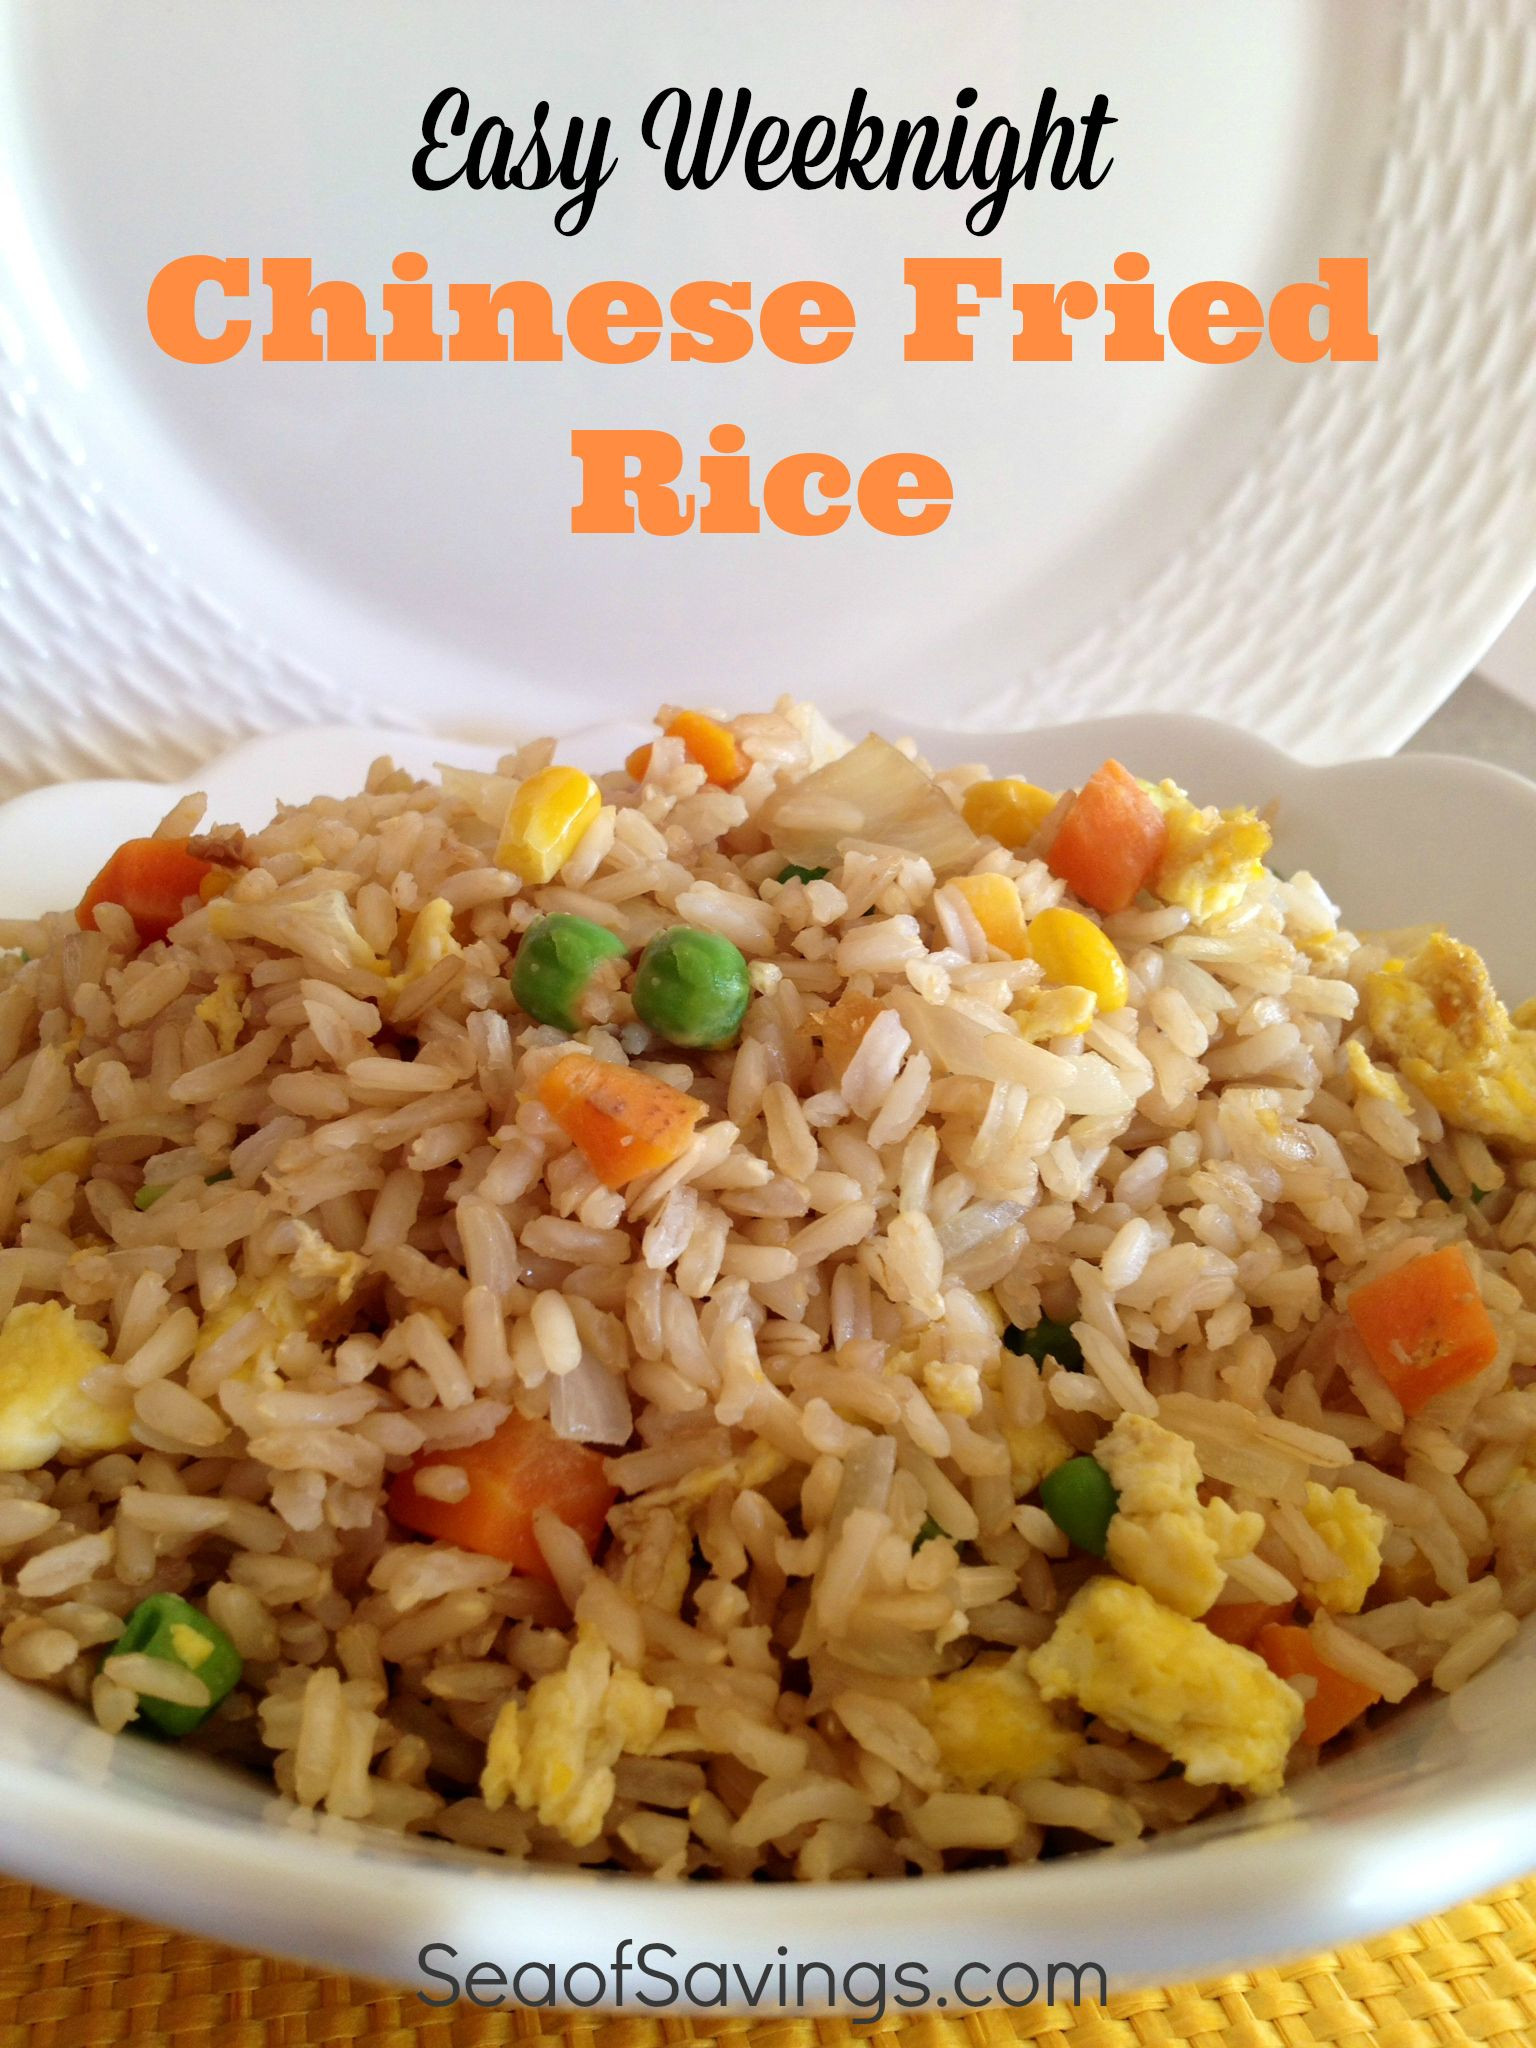 Chinese Fried Rice Recipe Easy
 Best 25 Chinese rice recipe ideas on Pinterest